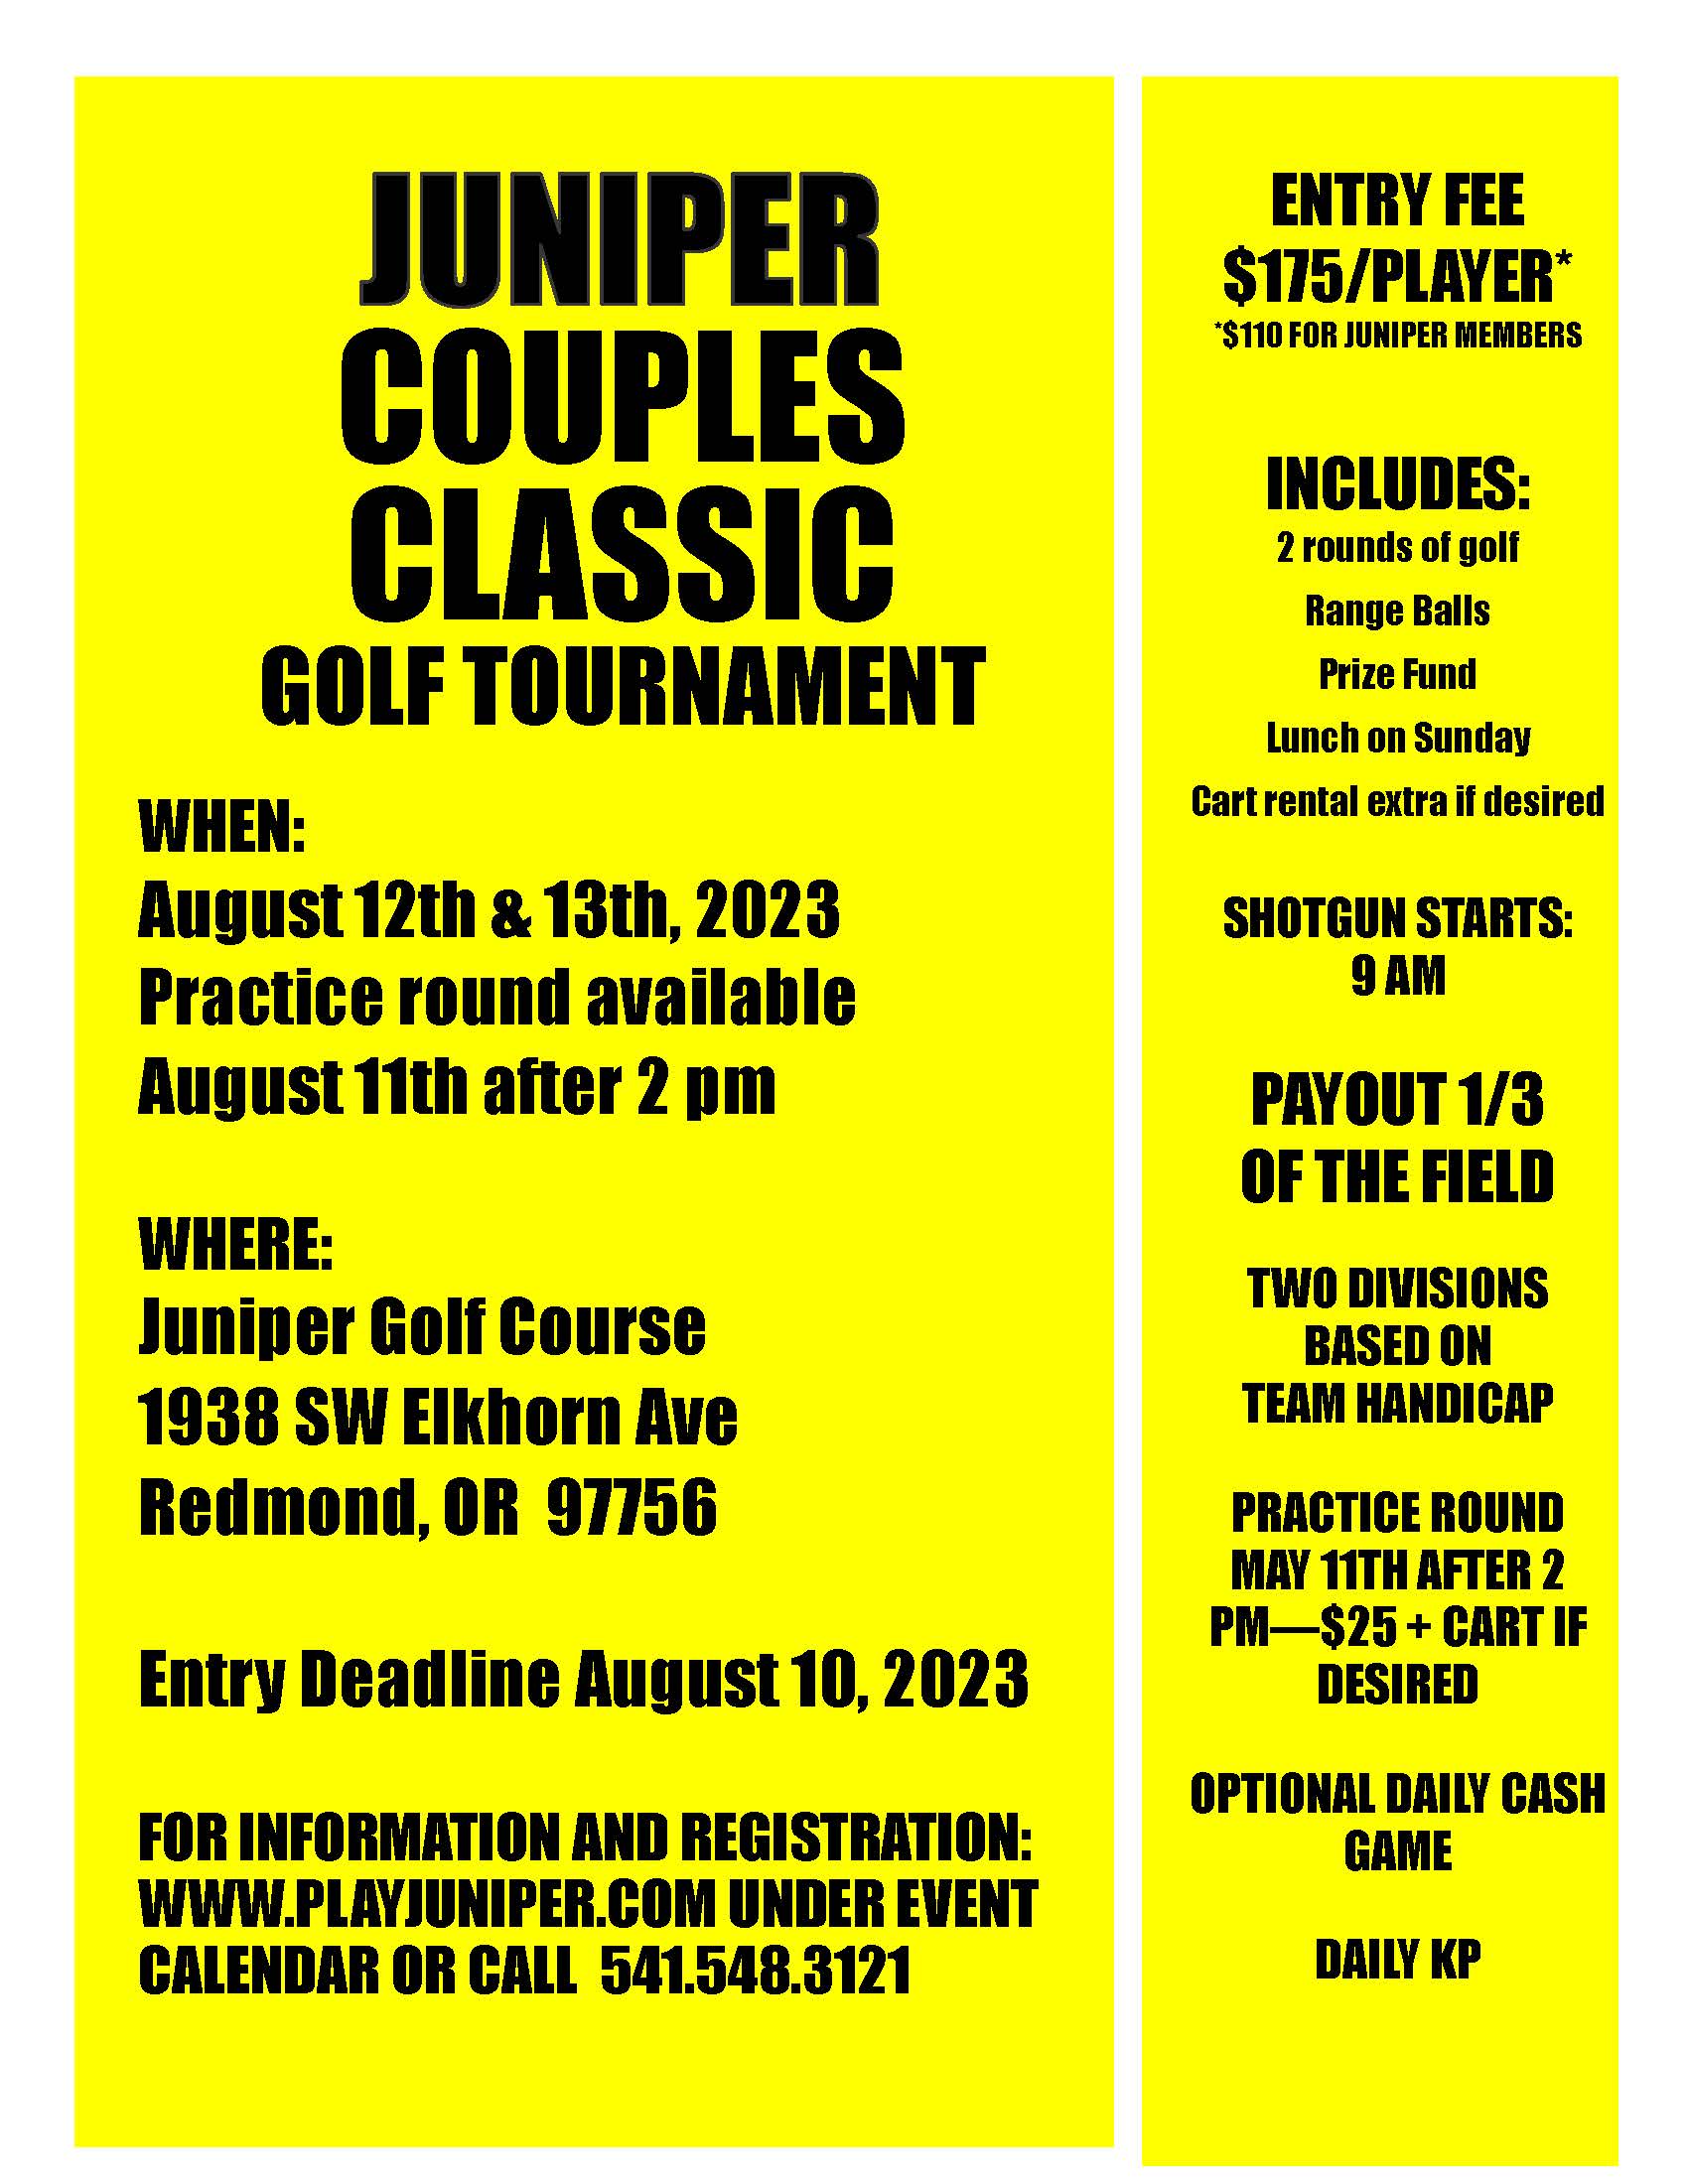 2023 Couples Classic Page 1v2